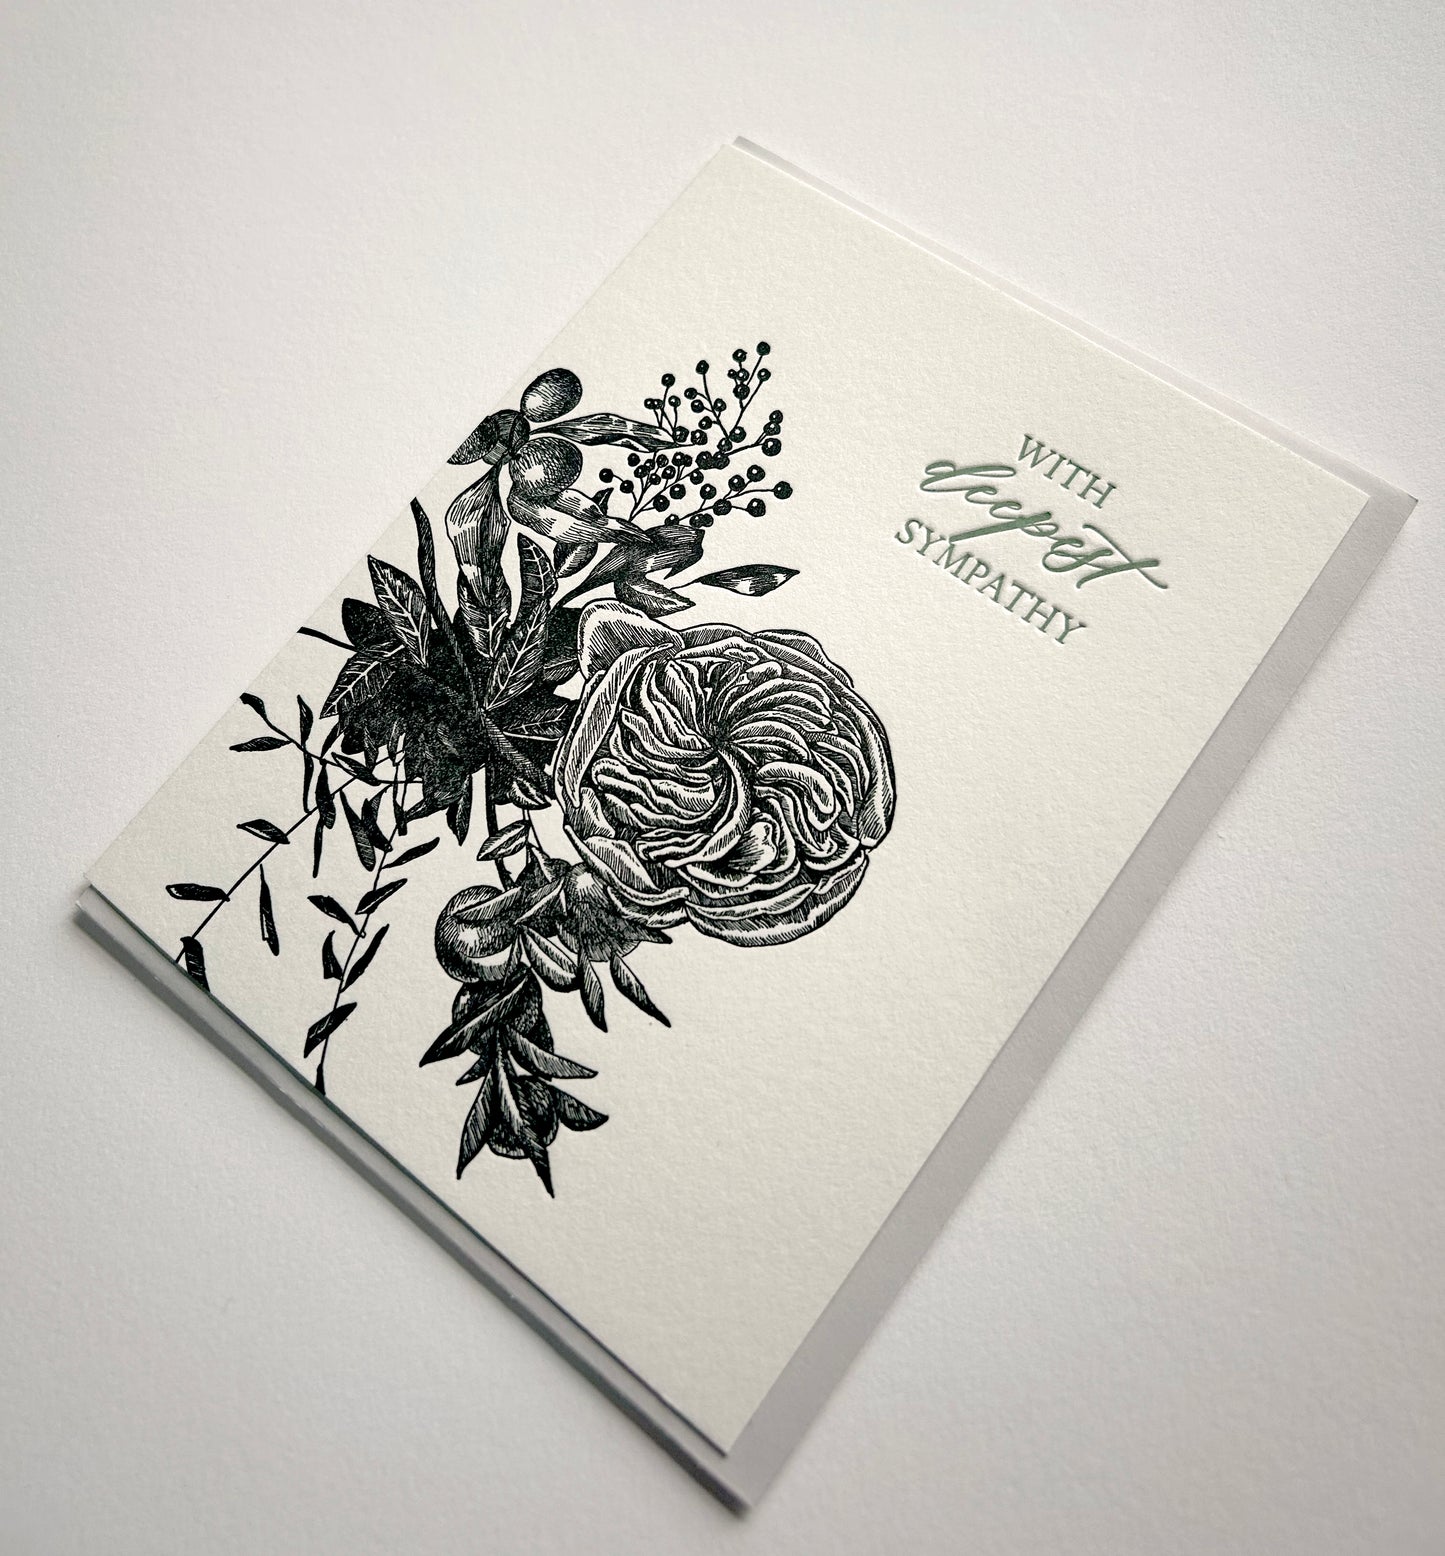 Letterpress sympathy card with florals that says "With deepest sympathy" by Rust Belt Love